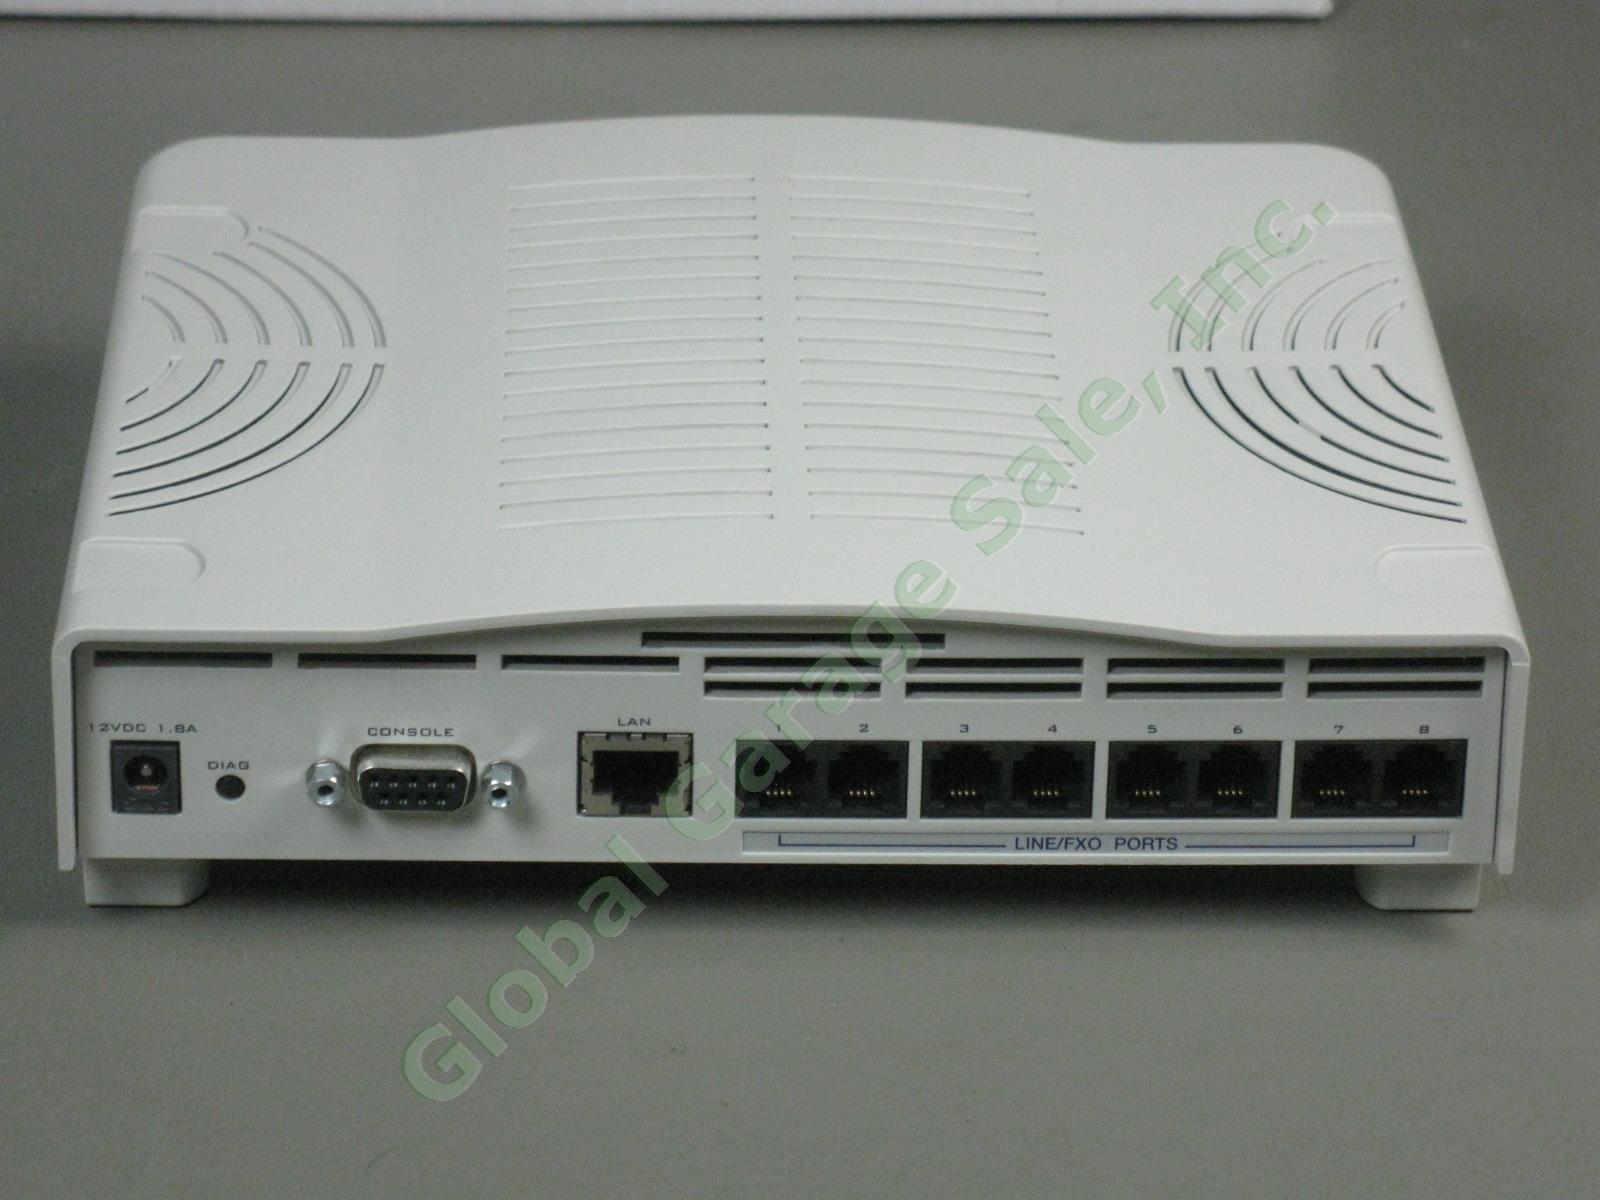 Quintum Tenor AF Series AFT800 8-Port VOIP Telephone Business Gateway Switch NR 2